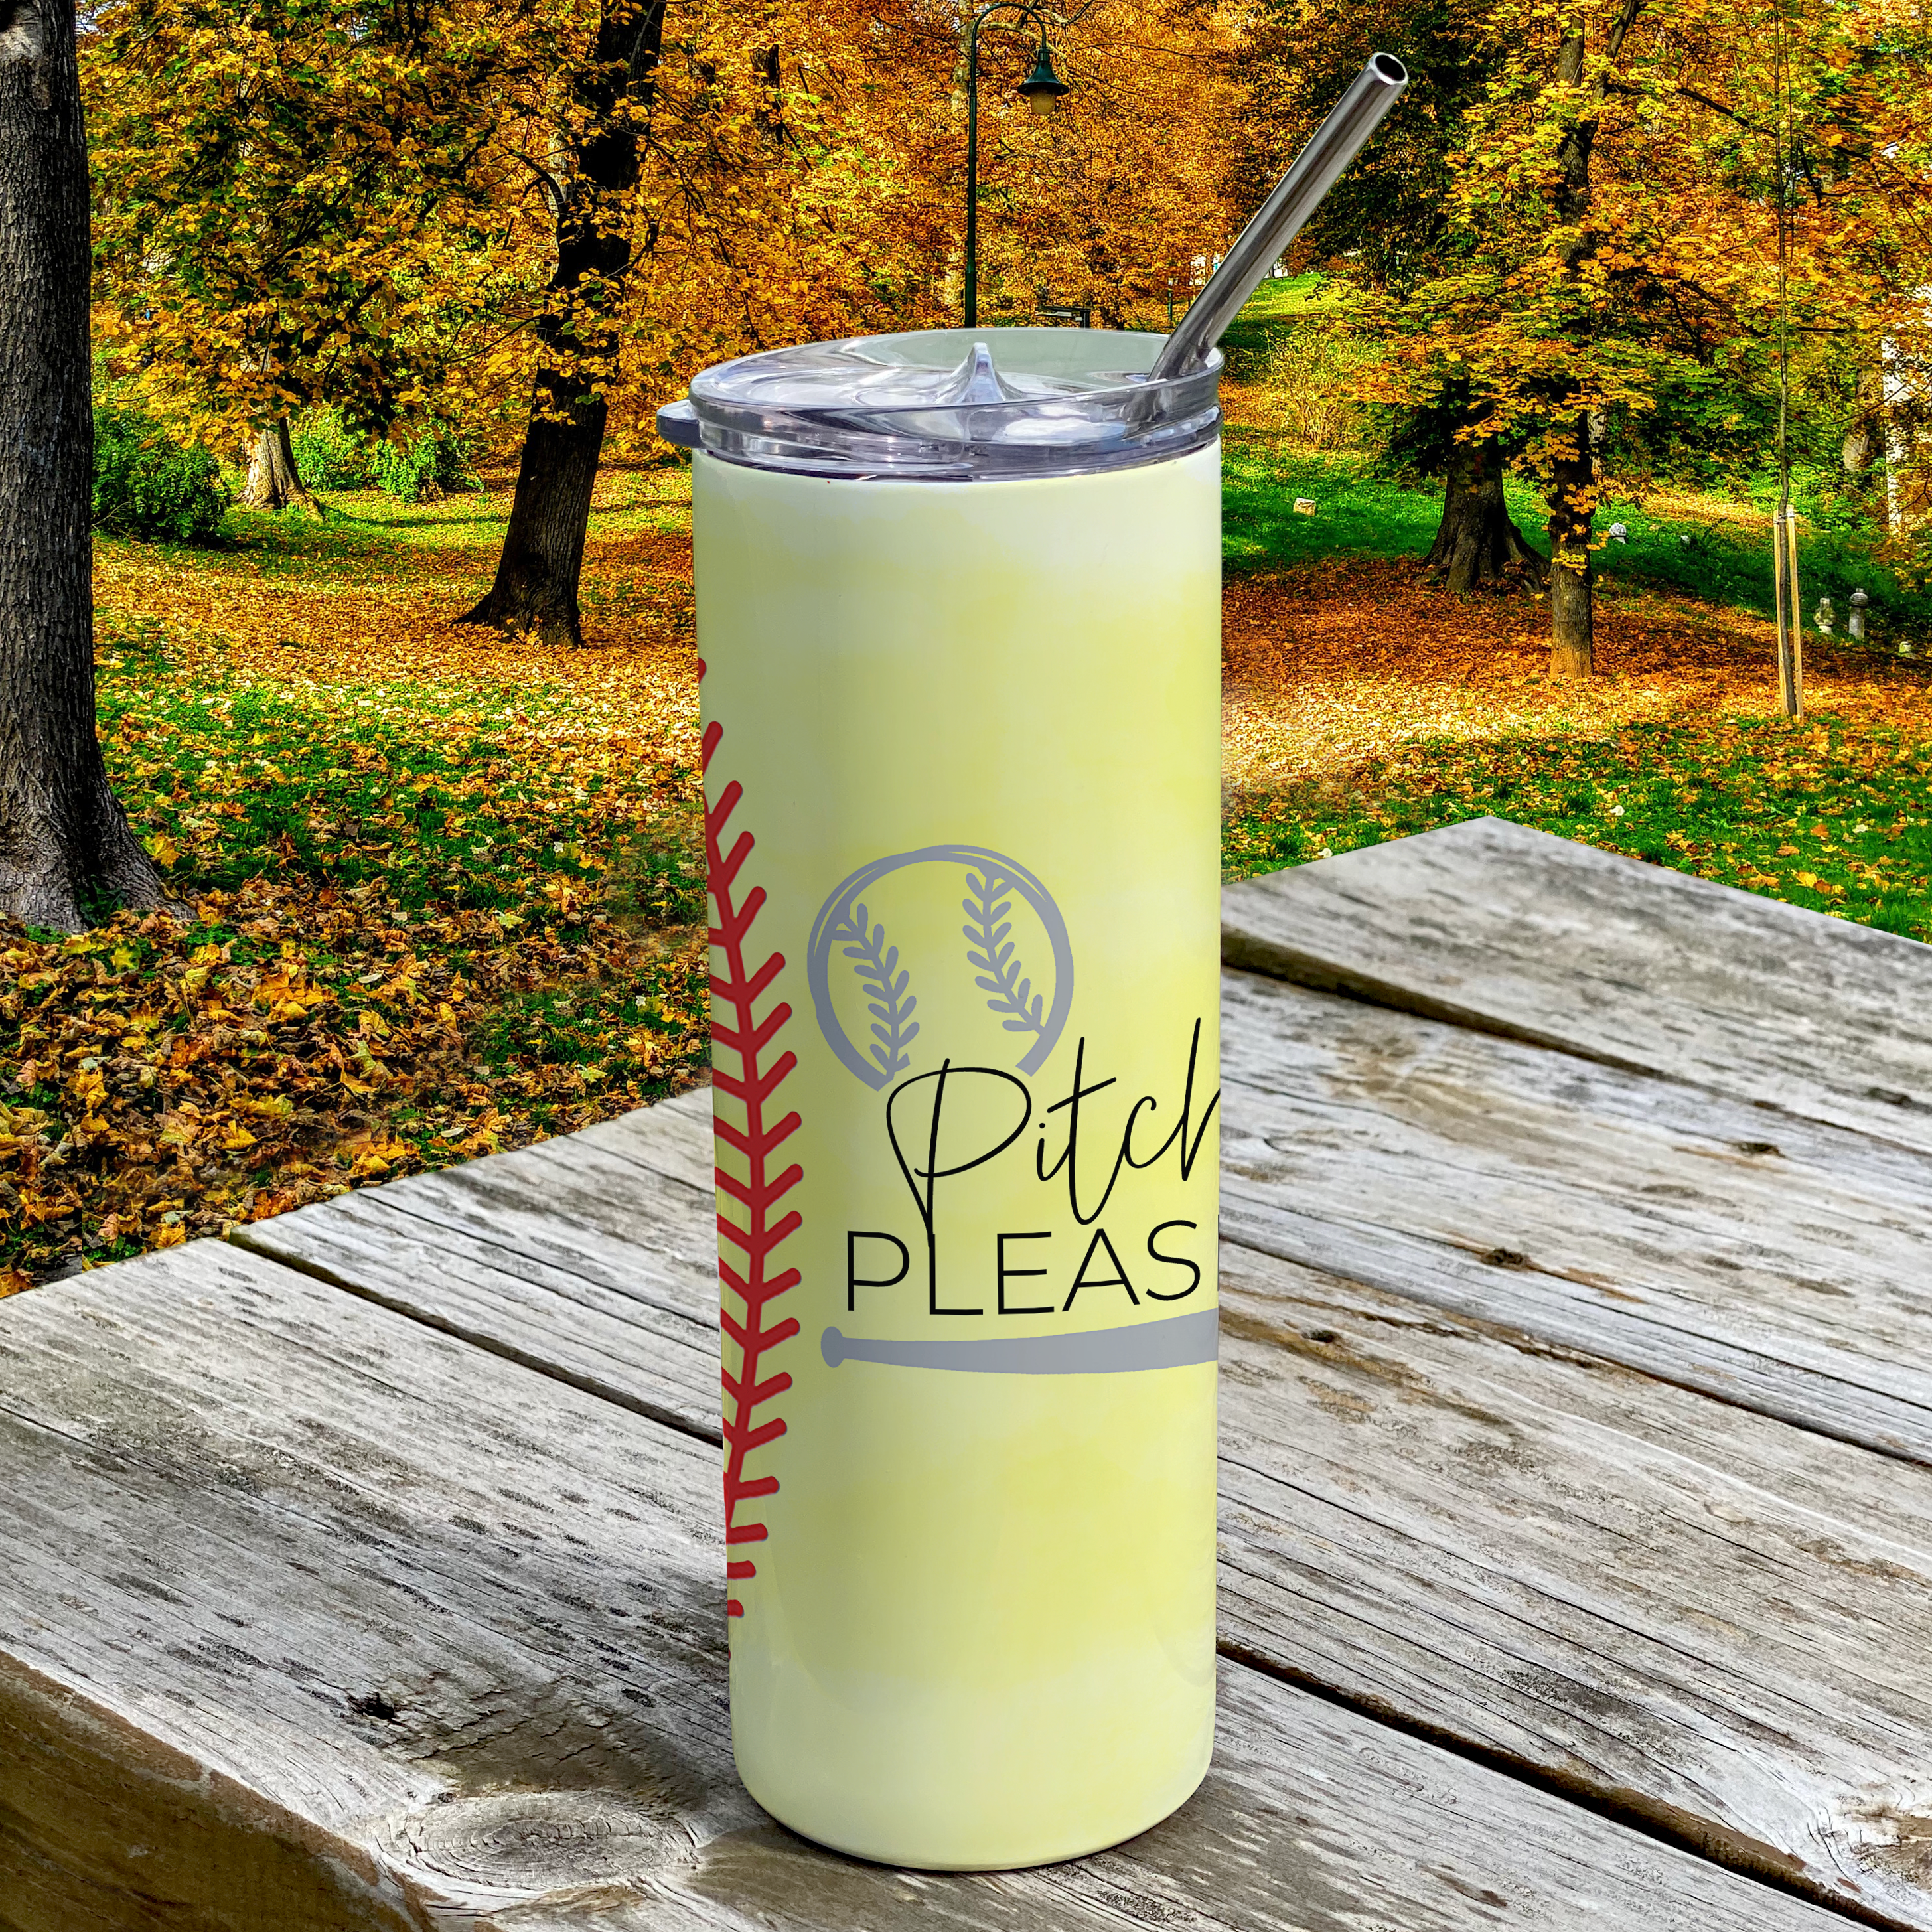 Sports Collection (Pitch Please - Softball) 20 Oz Stainless Steel Travel Tumbler with Straw